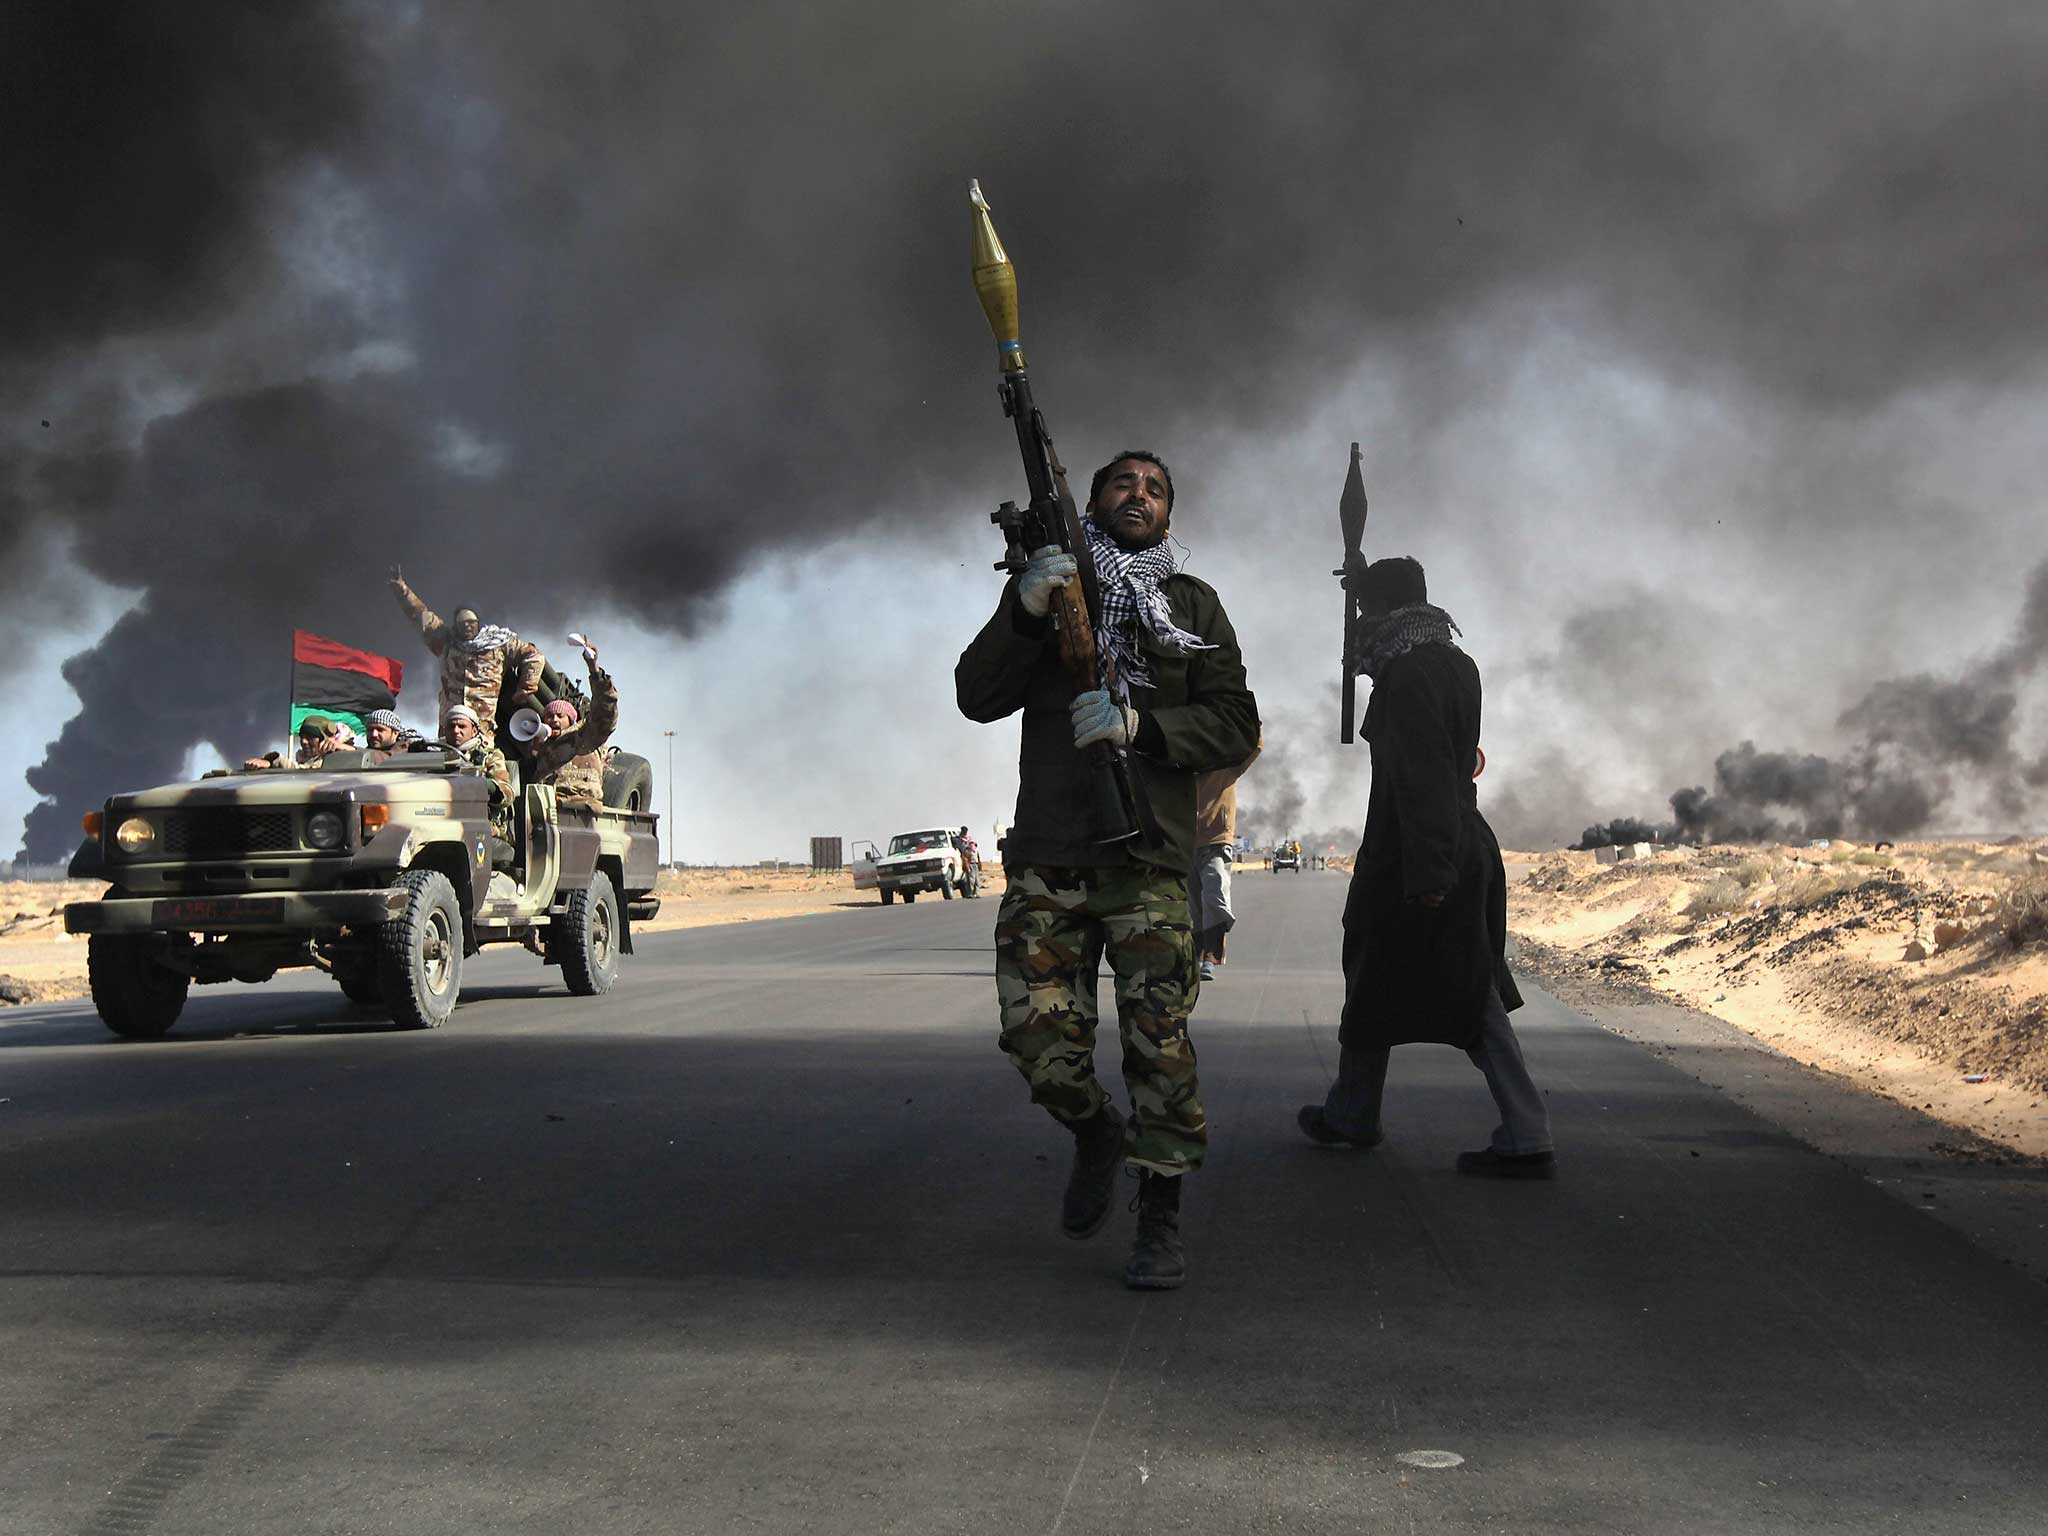 Rebels battle government troops in Ra’s Lanuf, 2011 (Getty)